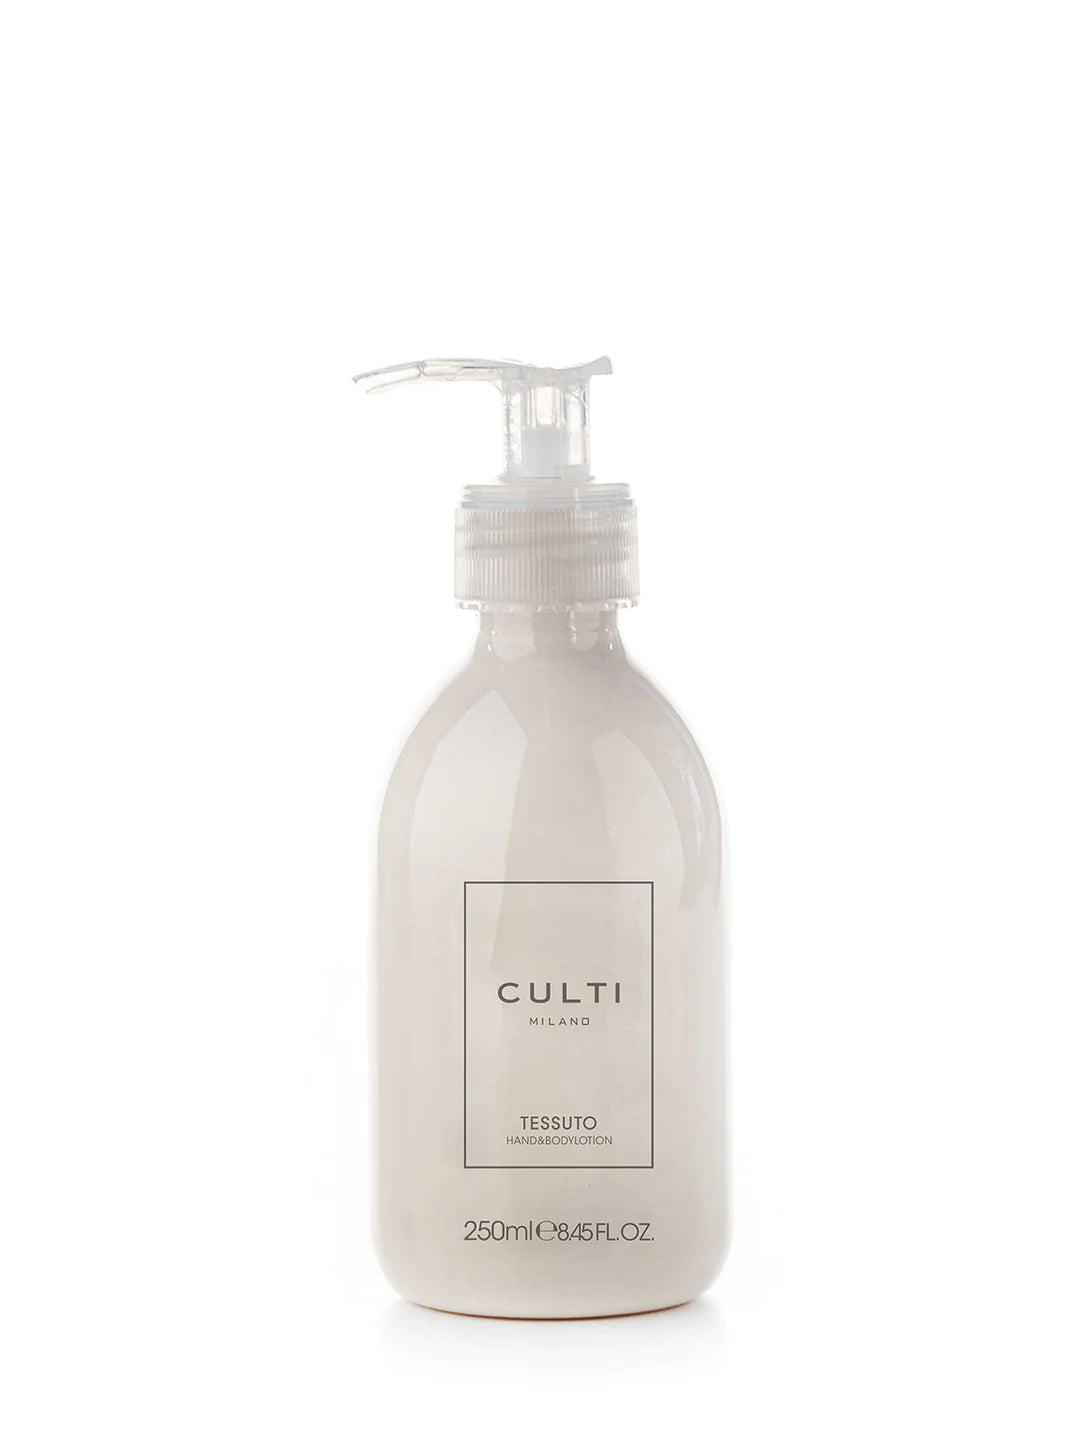 CULTI MILANO WELCOME COLLECTION 250 ml - LOTION $50.00